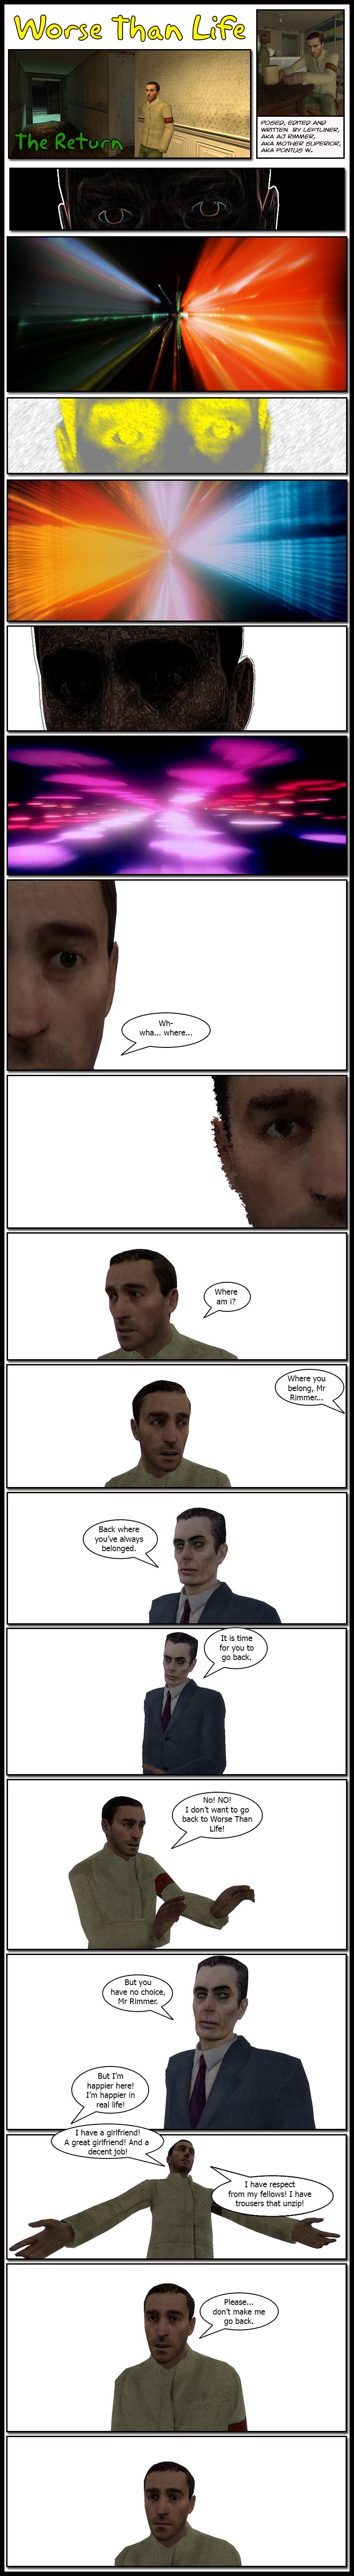 The comic opens with AJ Rimmer going through a 2001: A Space Odyssey Stargate sequence. He then finds himself in a white void, wondering where he is. Someone offscreen tells him he is where he belongs, as we see the G-Man from Half-Life 2 telling Rimmer he is back where he has always belonged, and that it is time for him to go back. Rimmer complains that no, he doesn't want to go back to Worse than Life, and the G-Man replies he has no choice. Rimmer states he is happier in real life, with a great girlfriend and a decent job, respect from his fellows and trousers that unzip. He begs the G-Man to not make him go back, then stares in silence for a moment as his gaze drops.